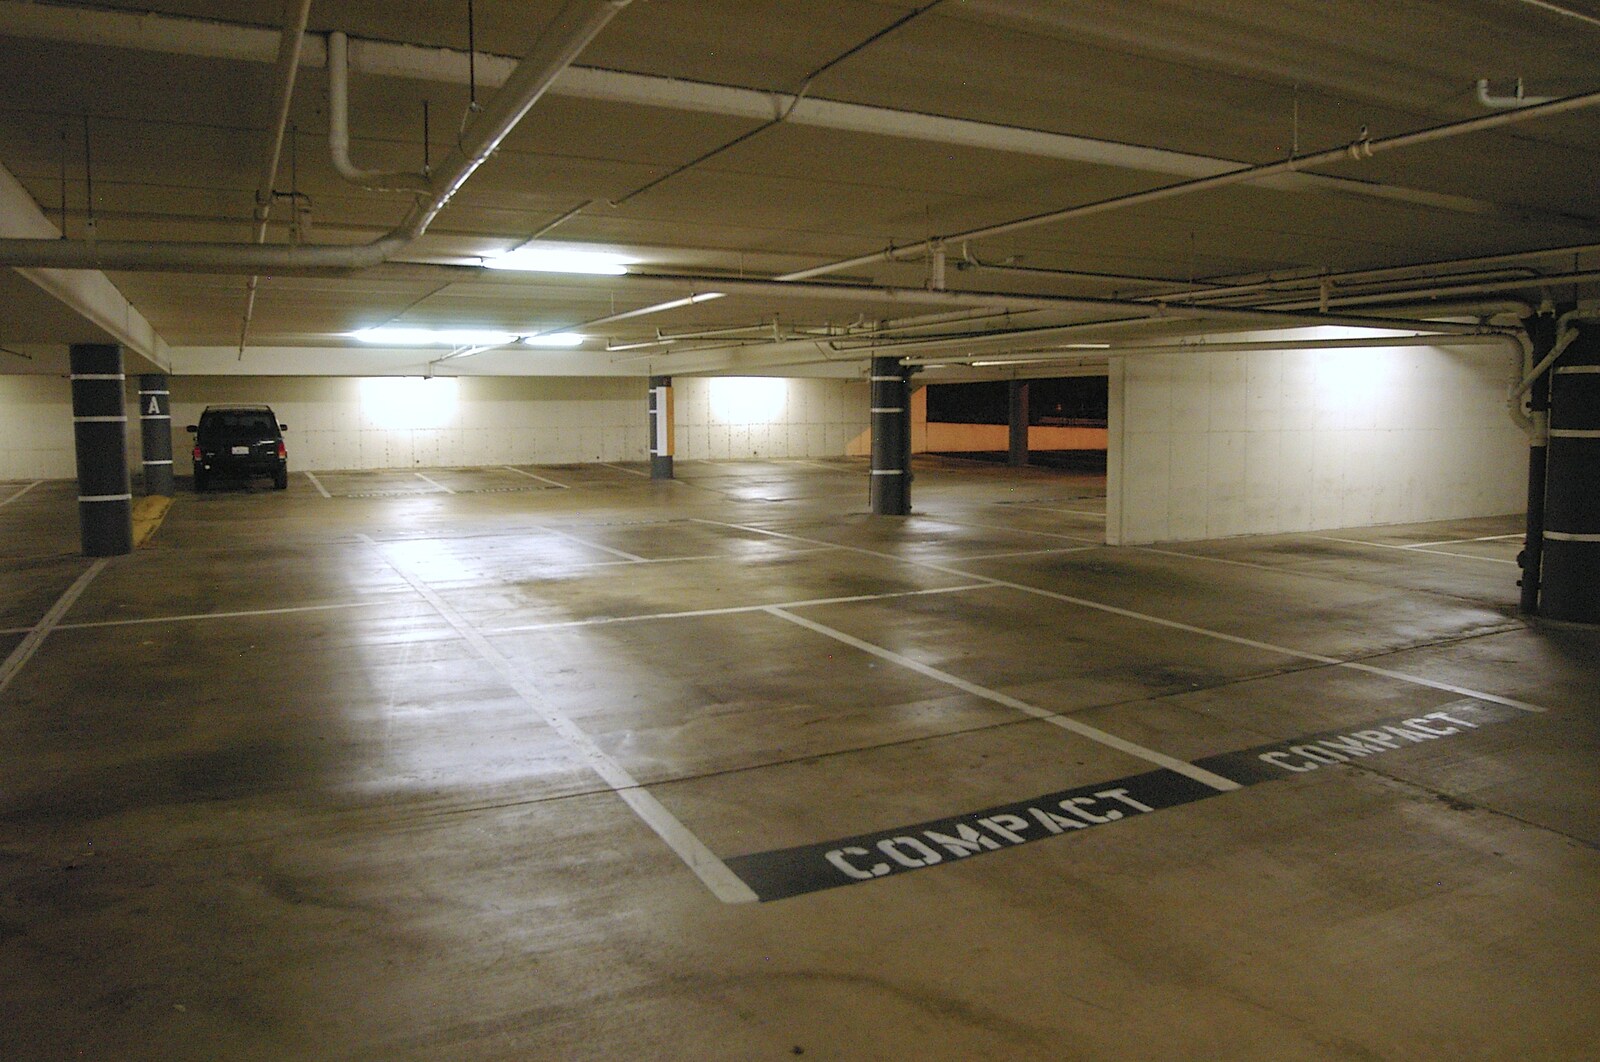 Compact spaces in a parking structure from San Diego Misc: Beaches, Car Parks and Airports, San Diego, California, US - 4th March 2006